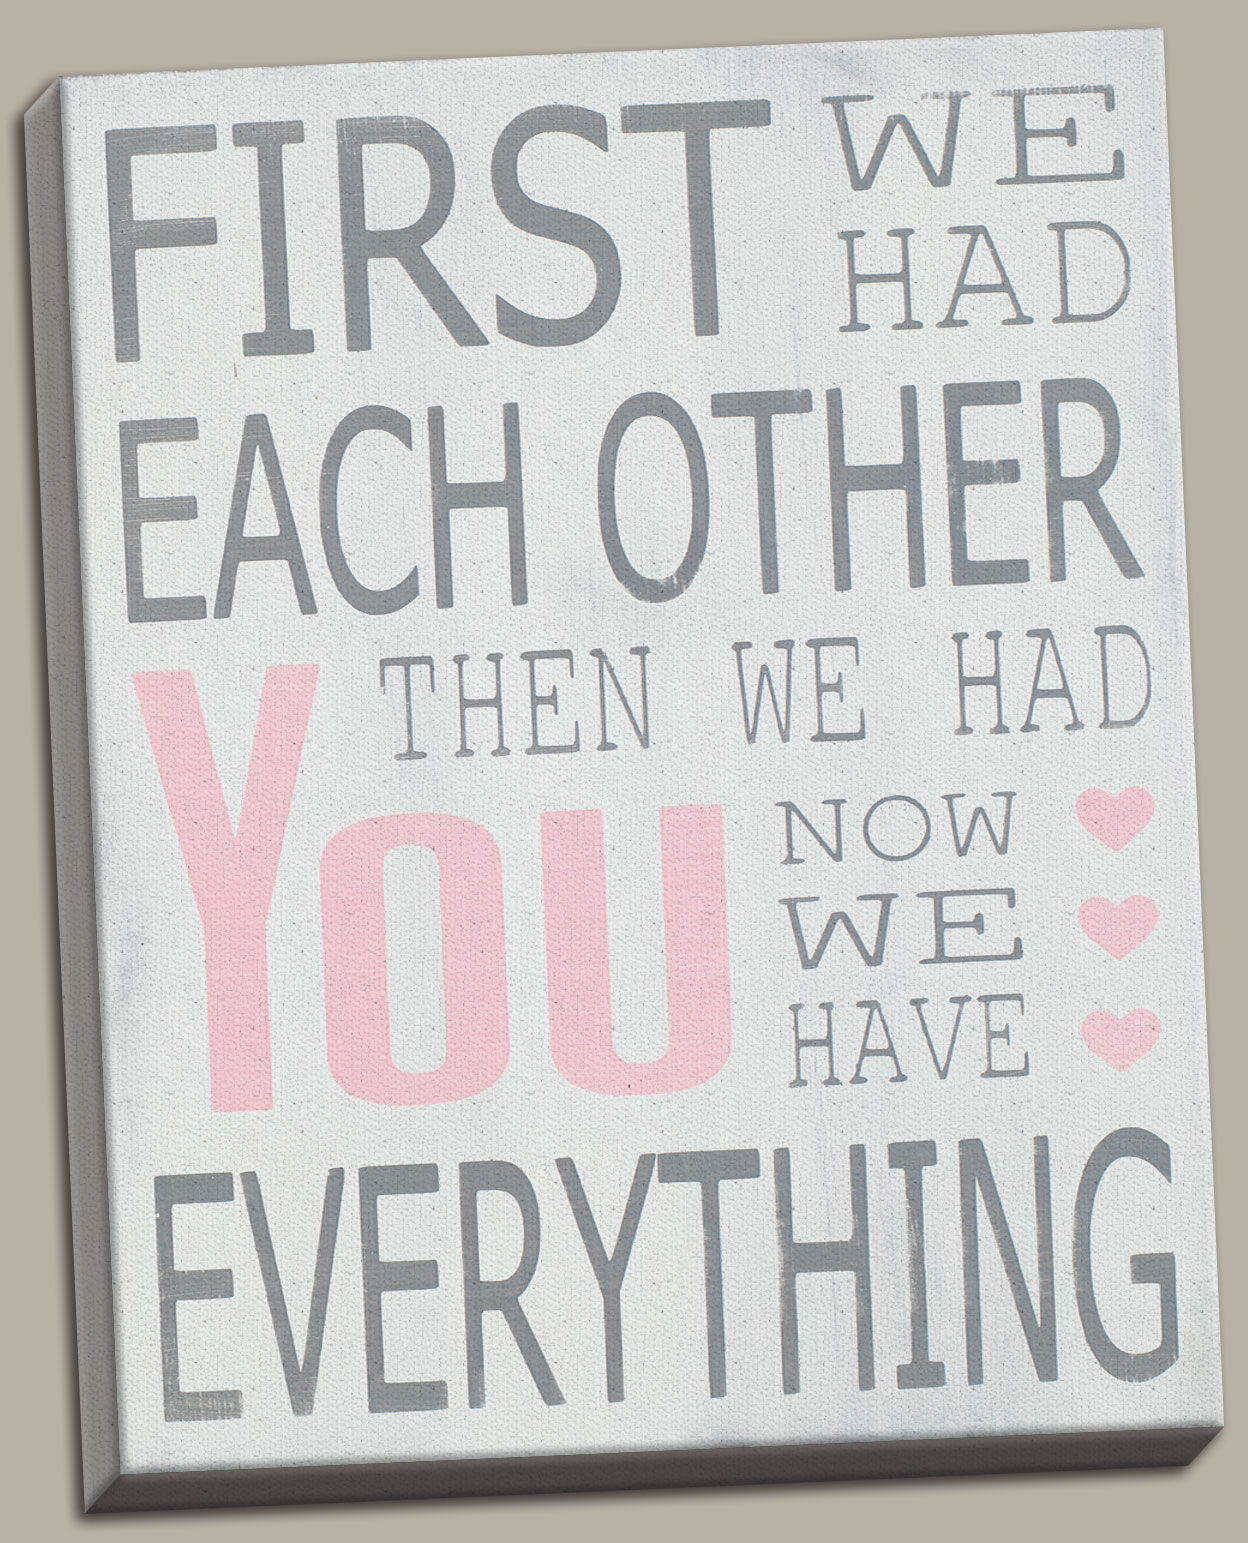 now we have everything First we had each other Print. then we had you